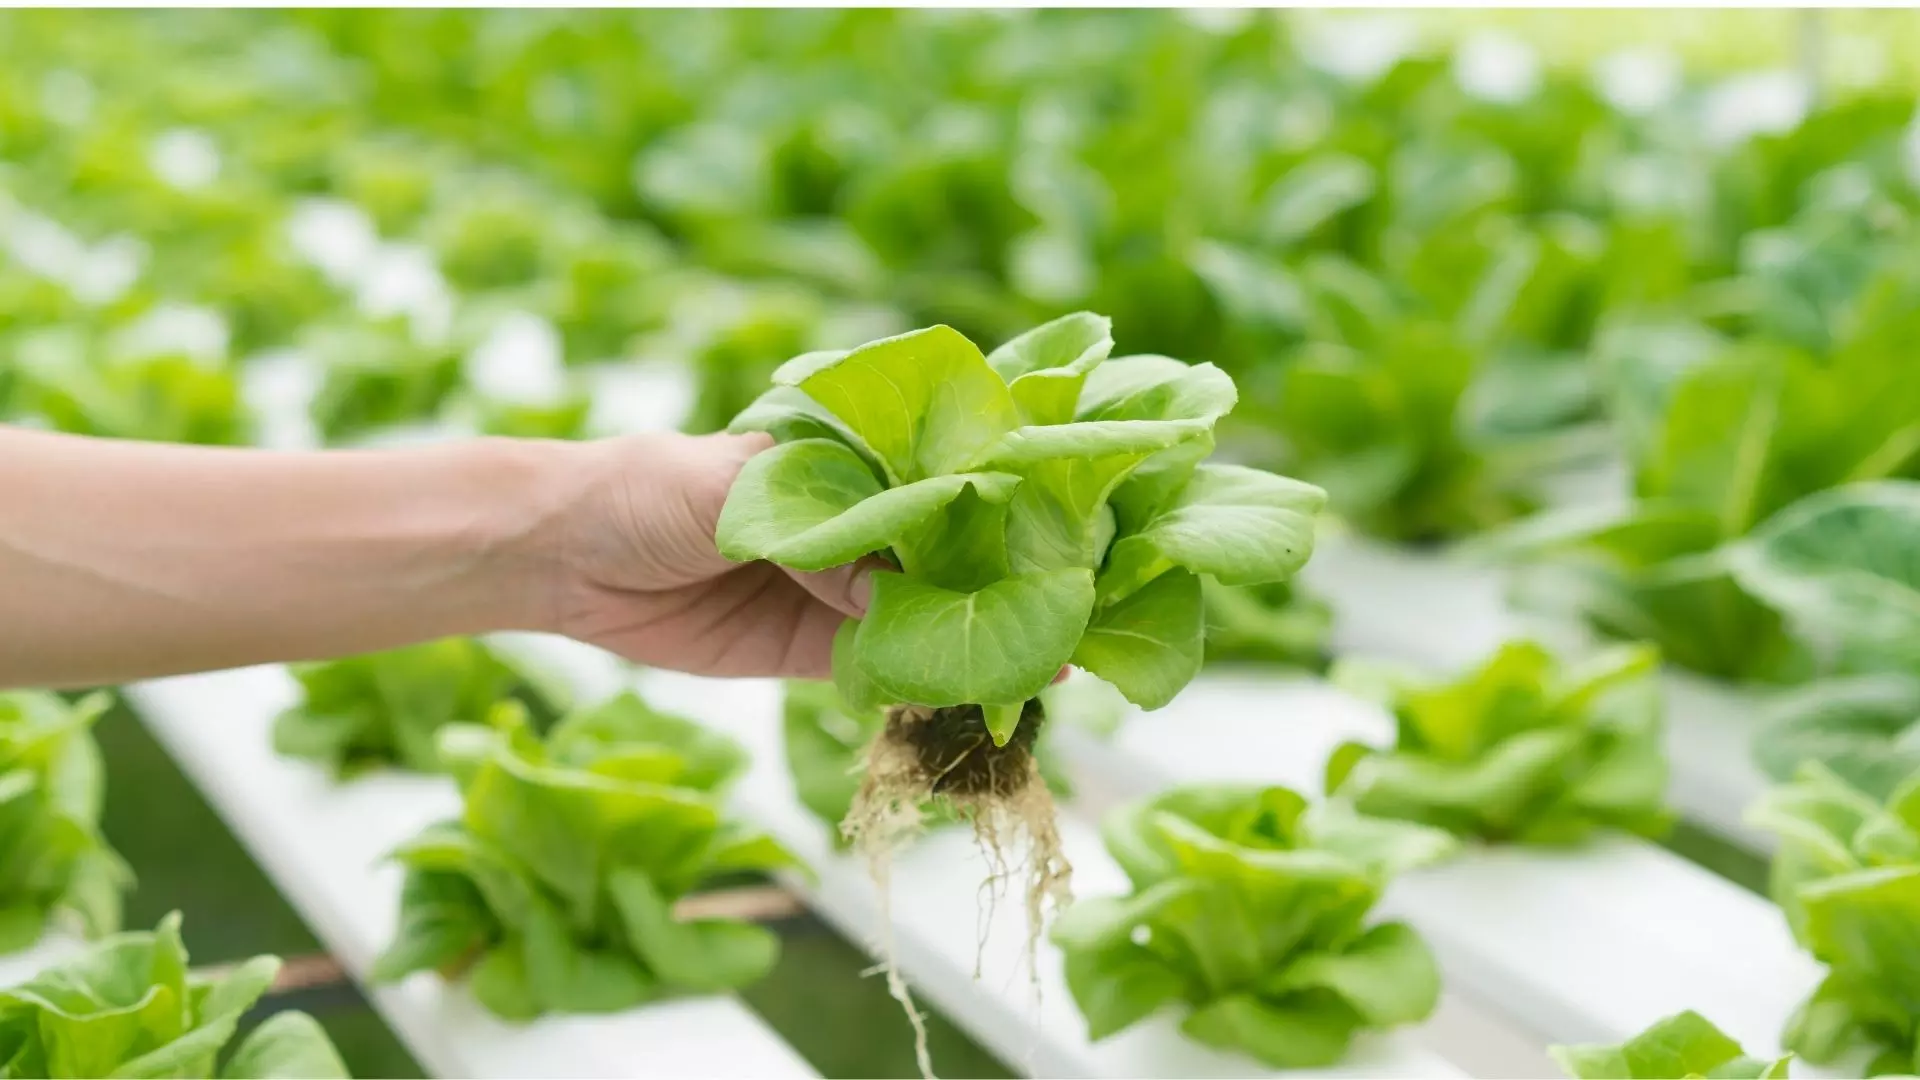 Tried and tested hydroponic farms that deliver across Mumbai